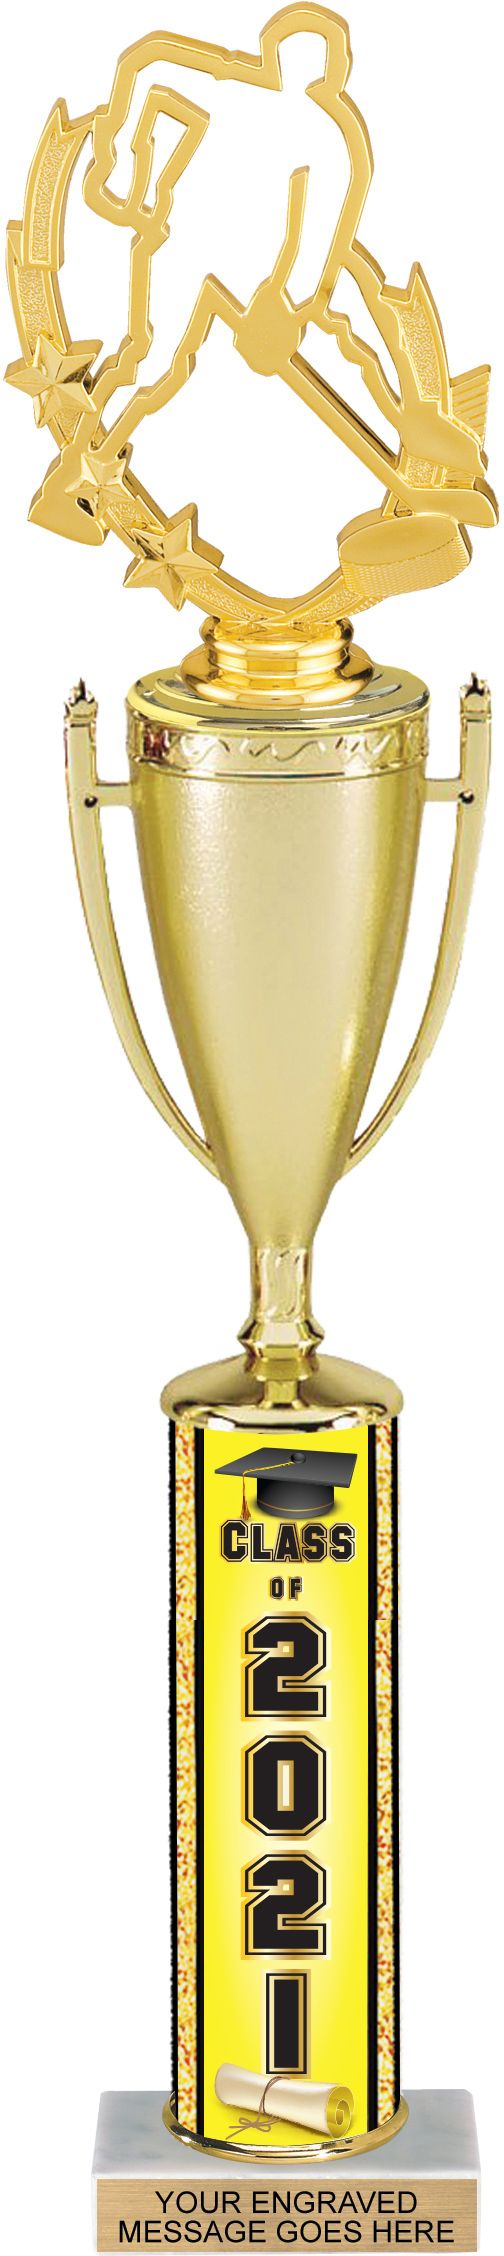 Class of 2021 Column Cup Trophy - 17 inch